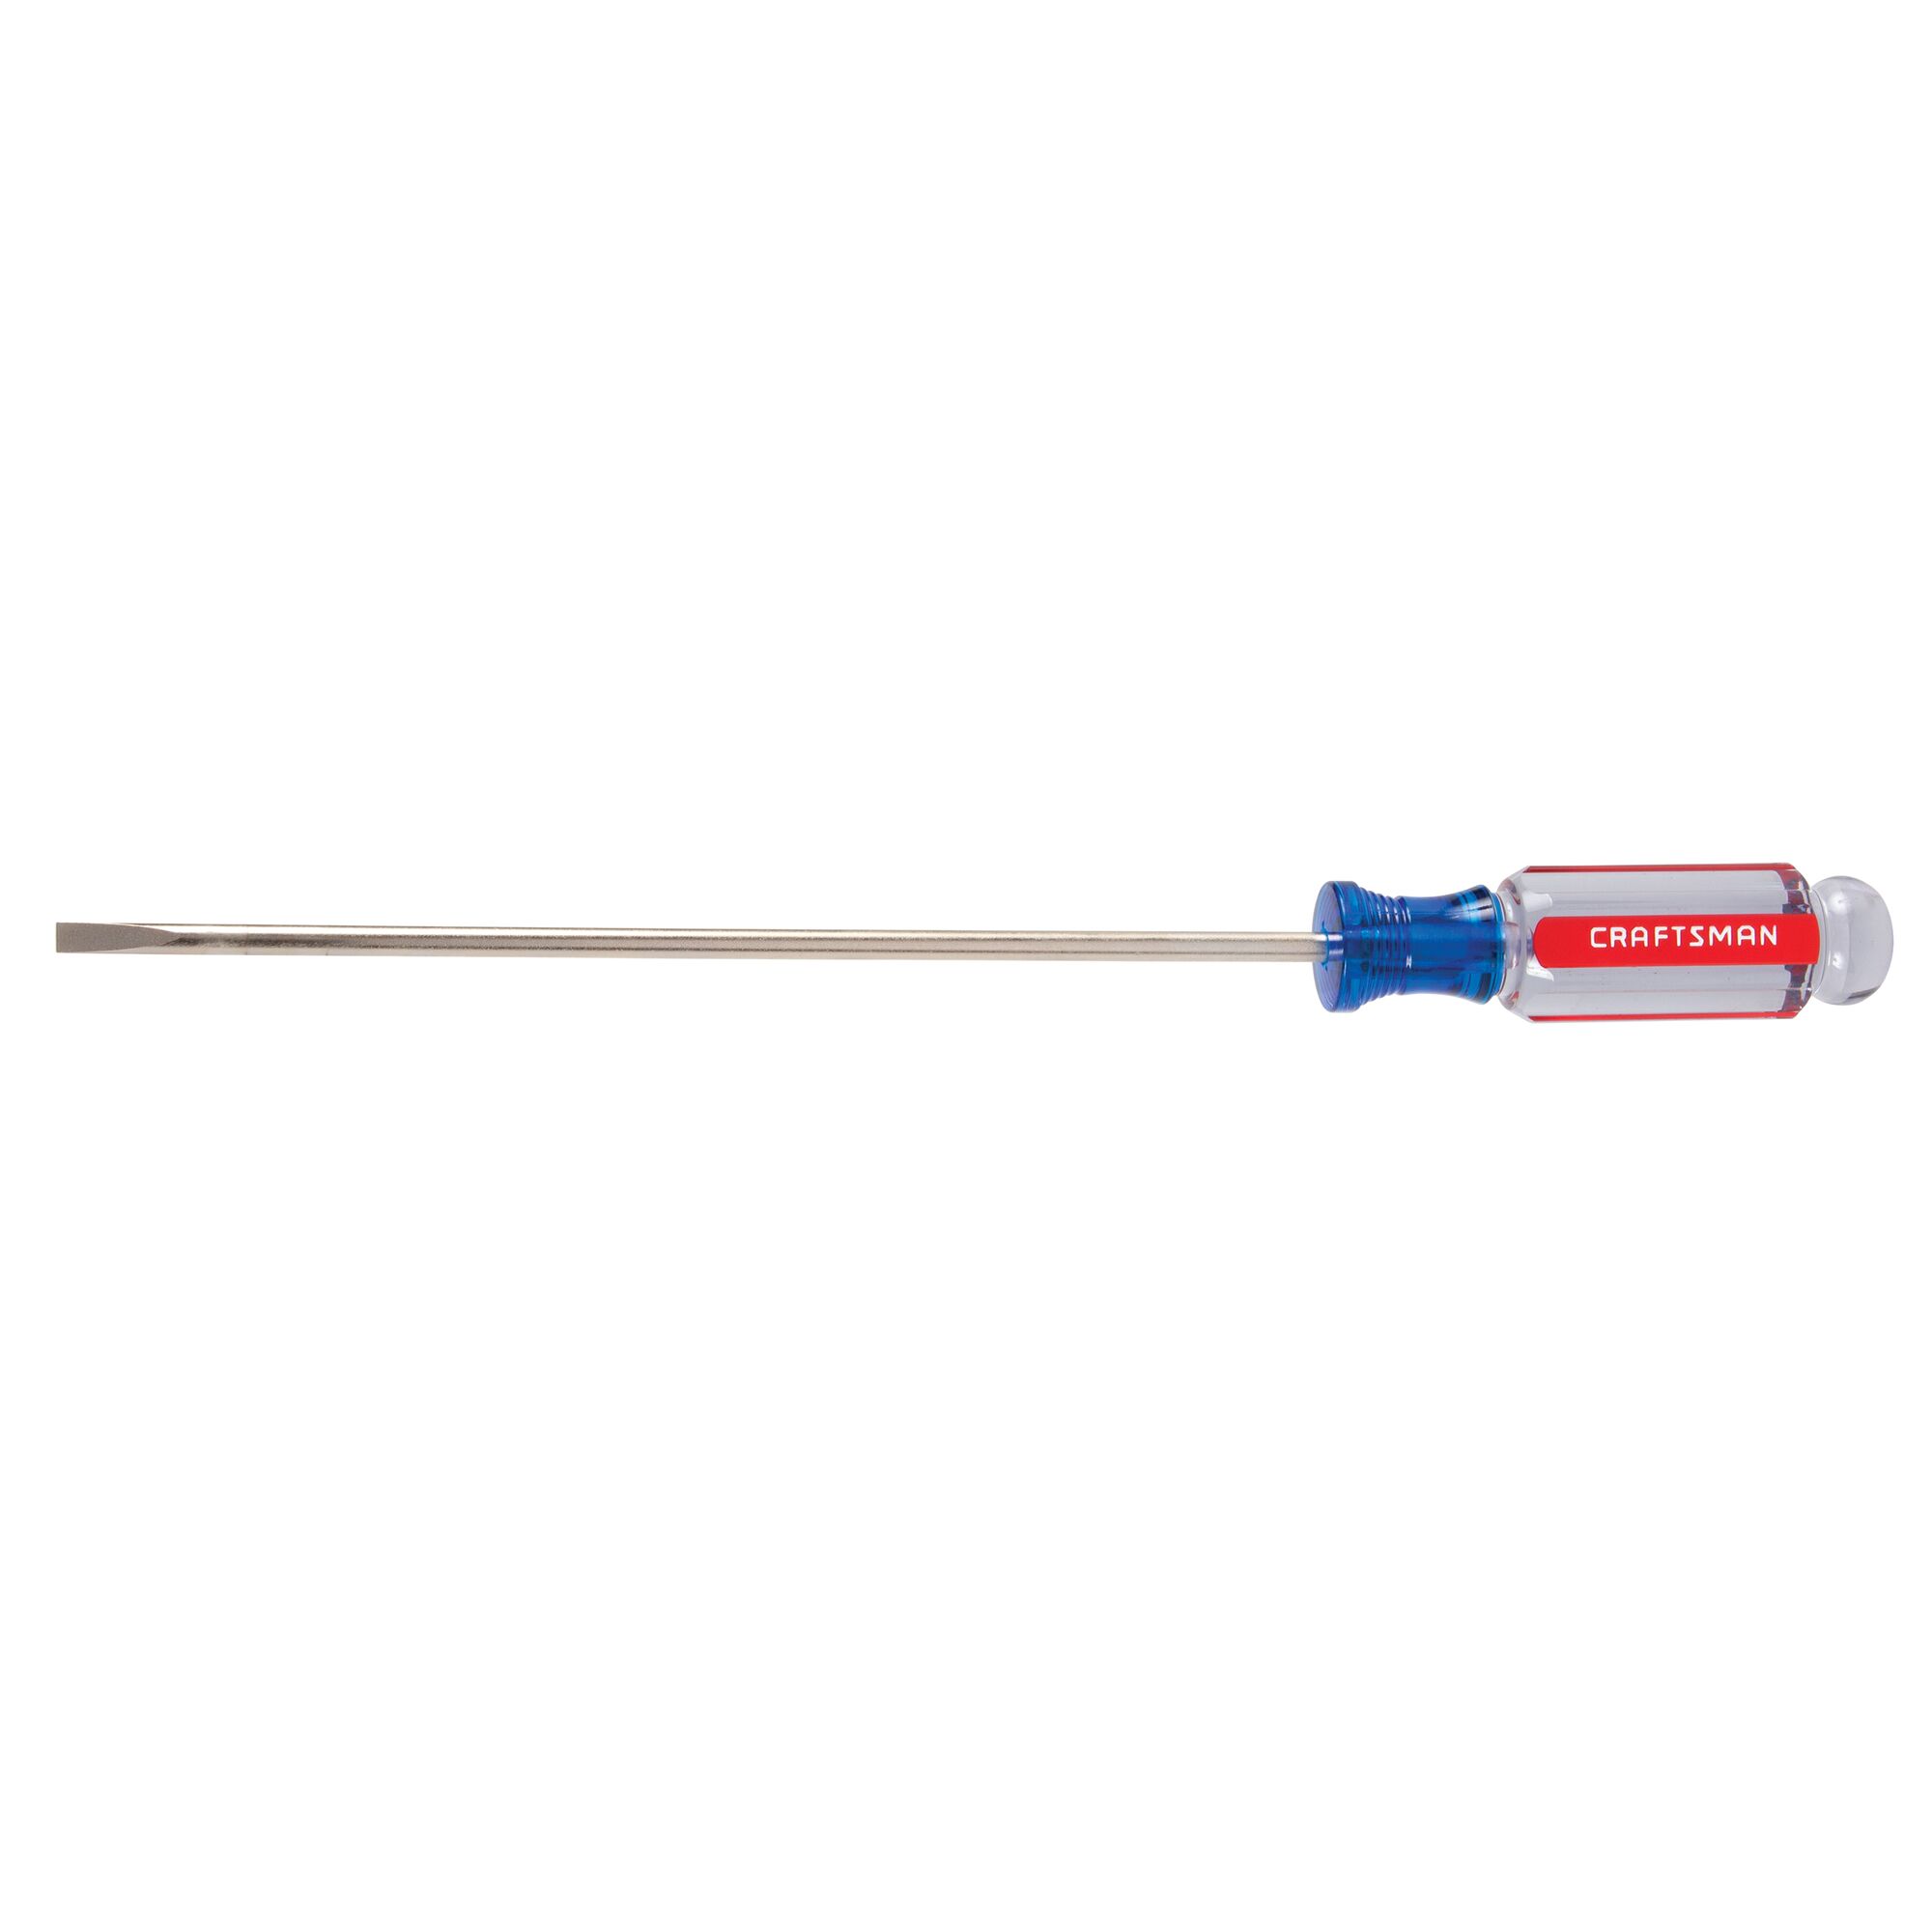 Three sixteenths inch by 8 inch Slotted Cabinet Acetate ScrewDriver.